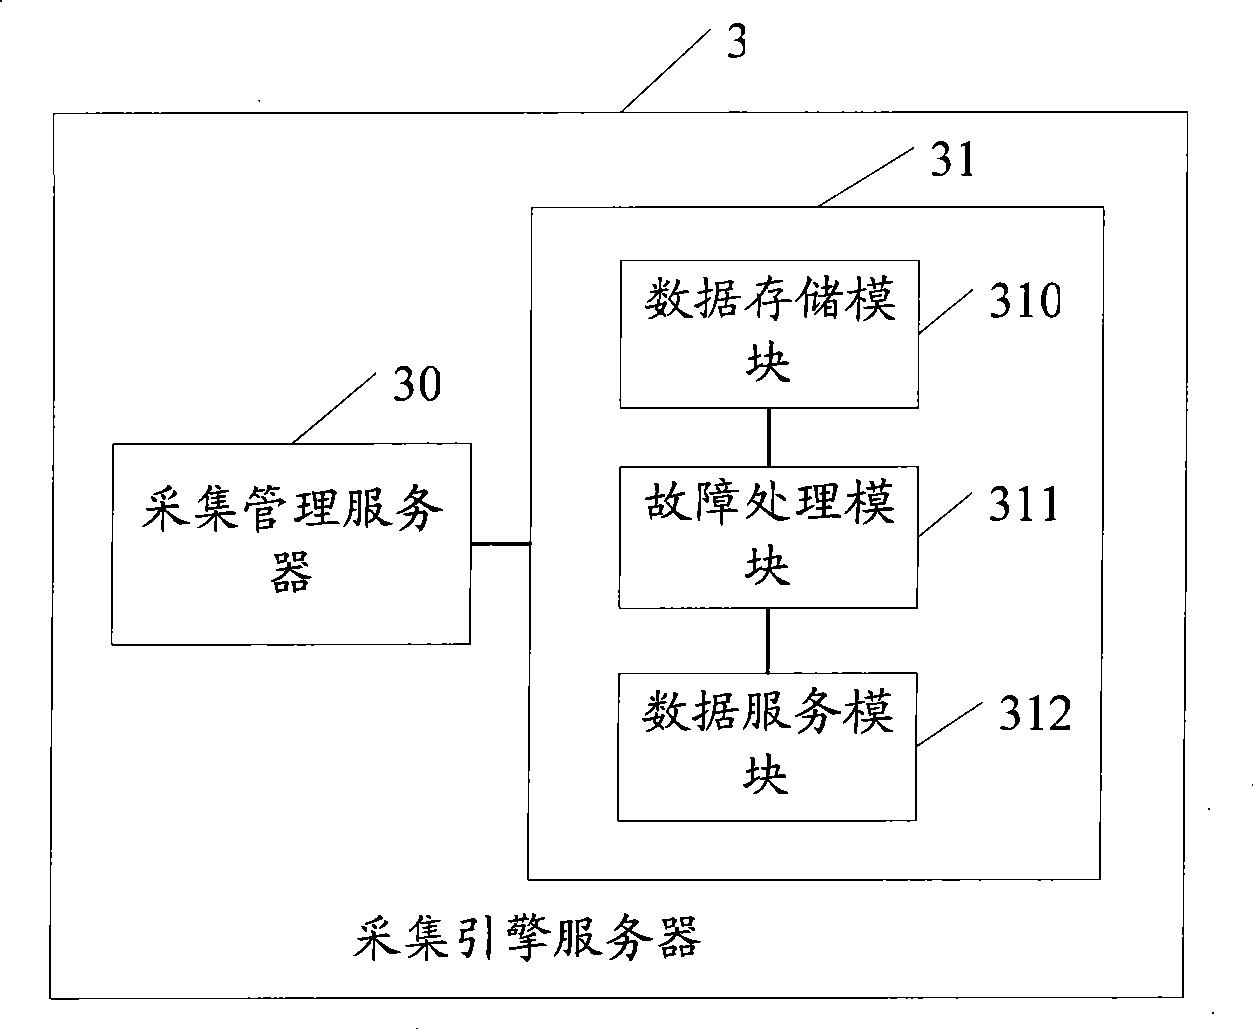 Financial service monitoring method and system